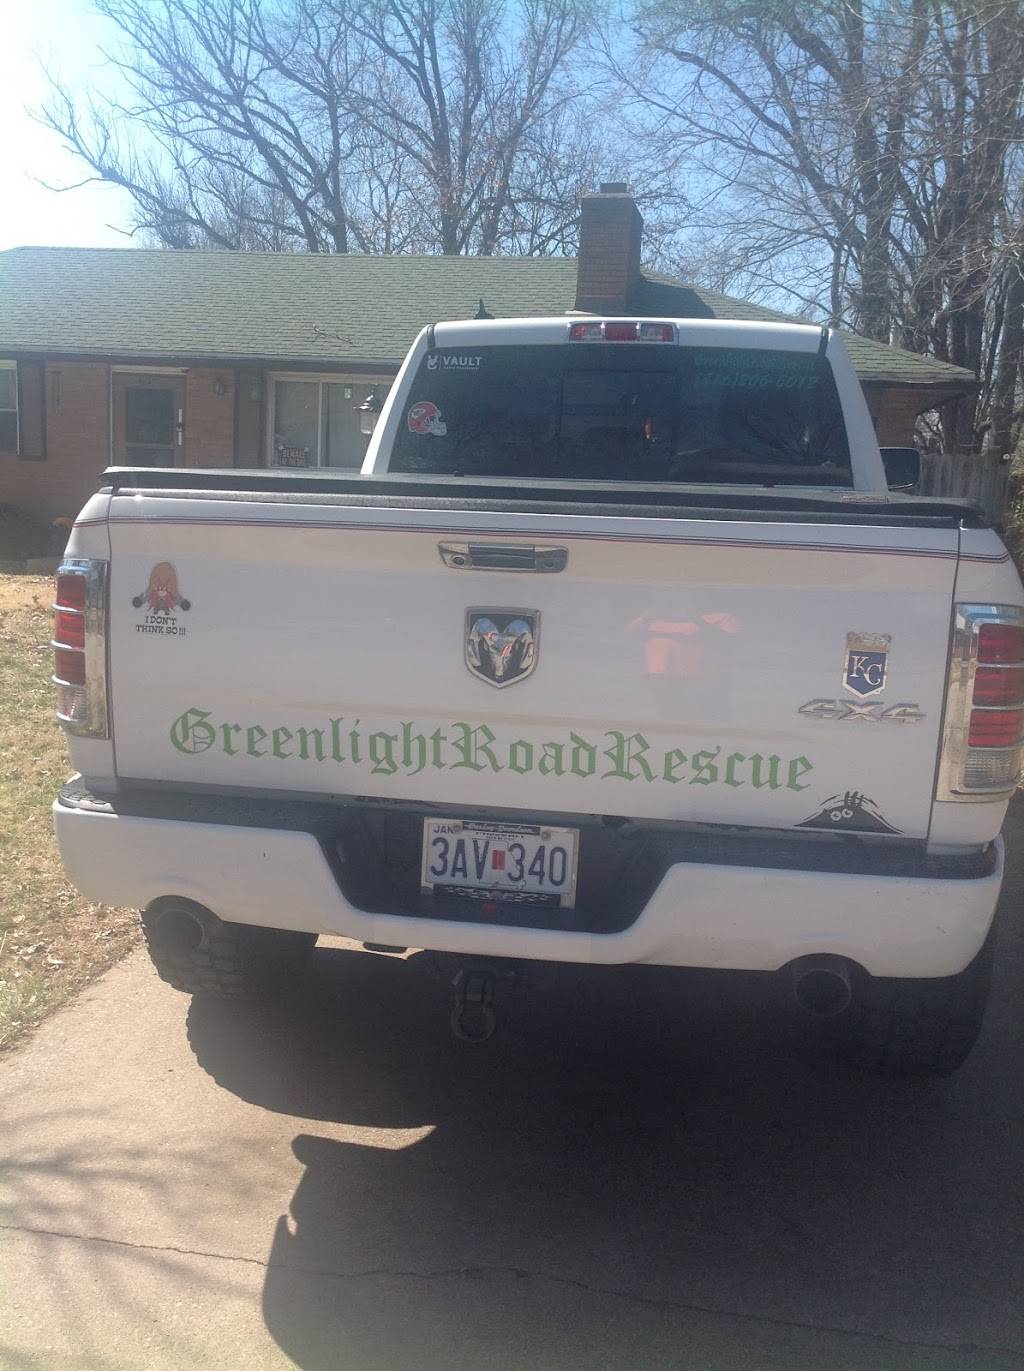 GreenlightRoadRescue | 3512 Drumm Rd, Independence, MO 64055 | Phone: (816) 206-6012